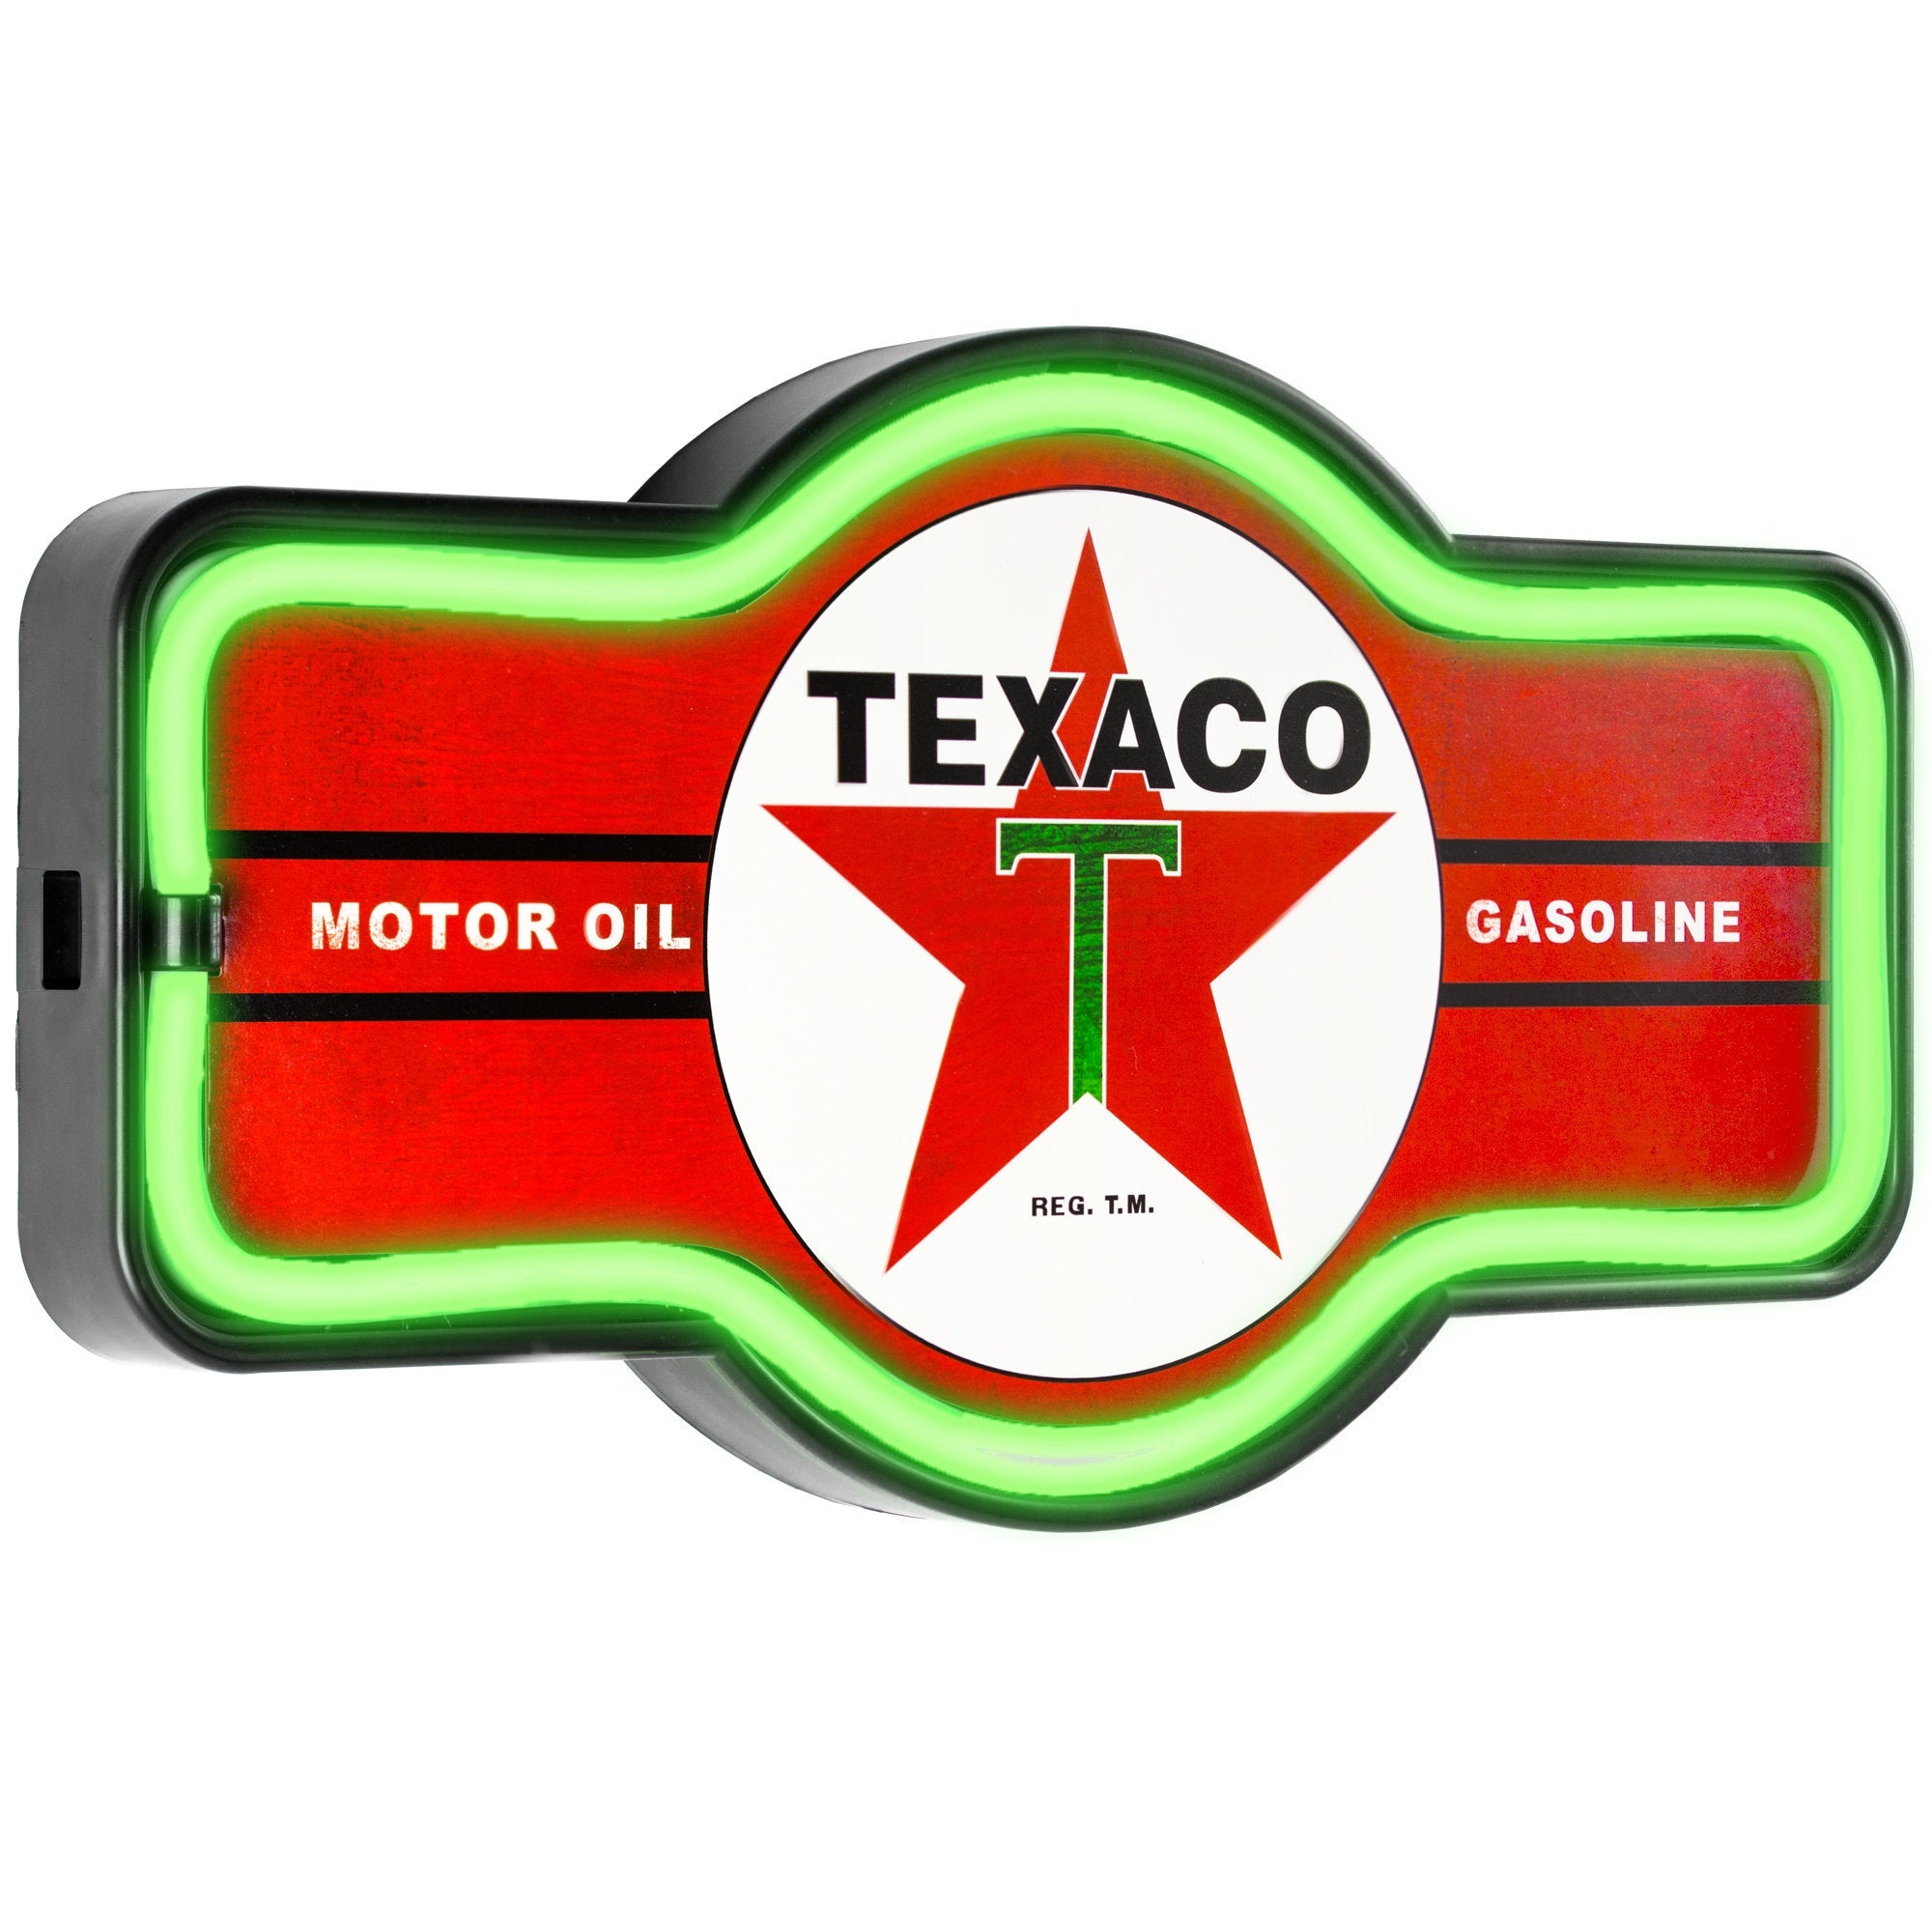 Texaco Motor Oil Gasoline Battery Powered LED Marquee Sign